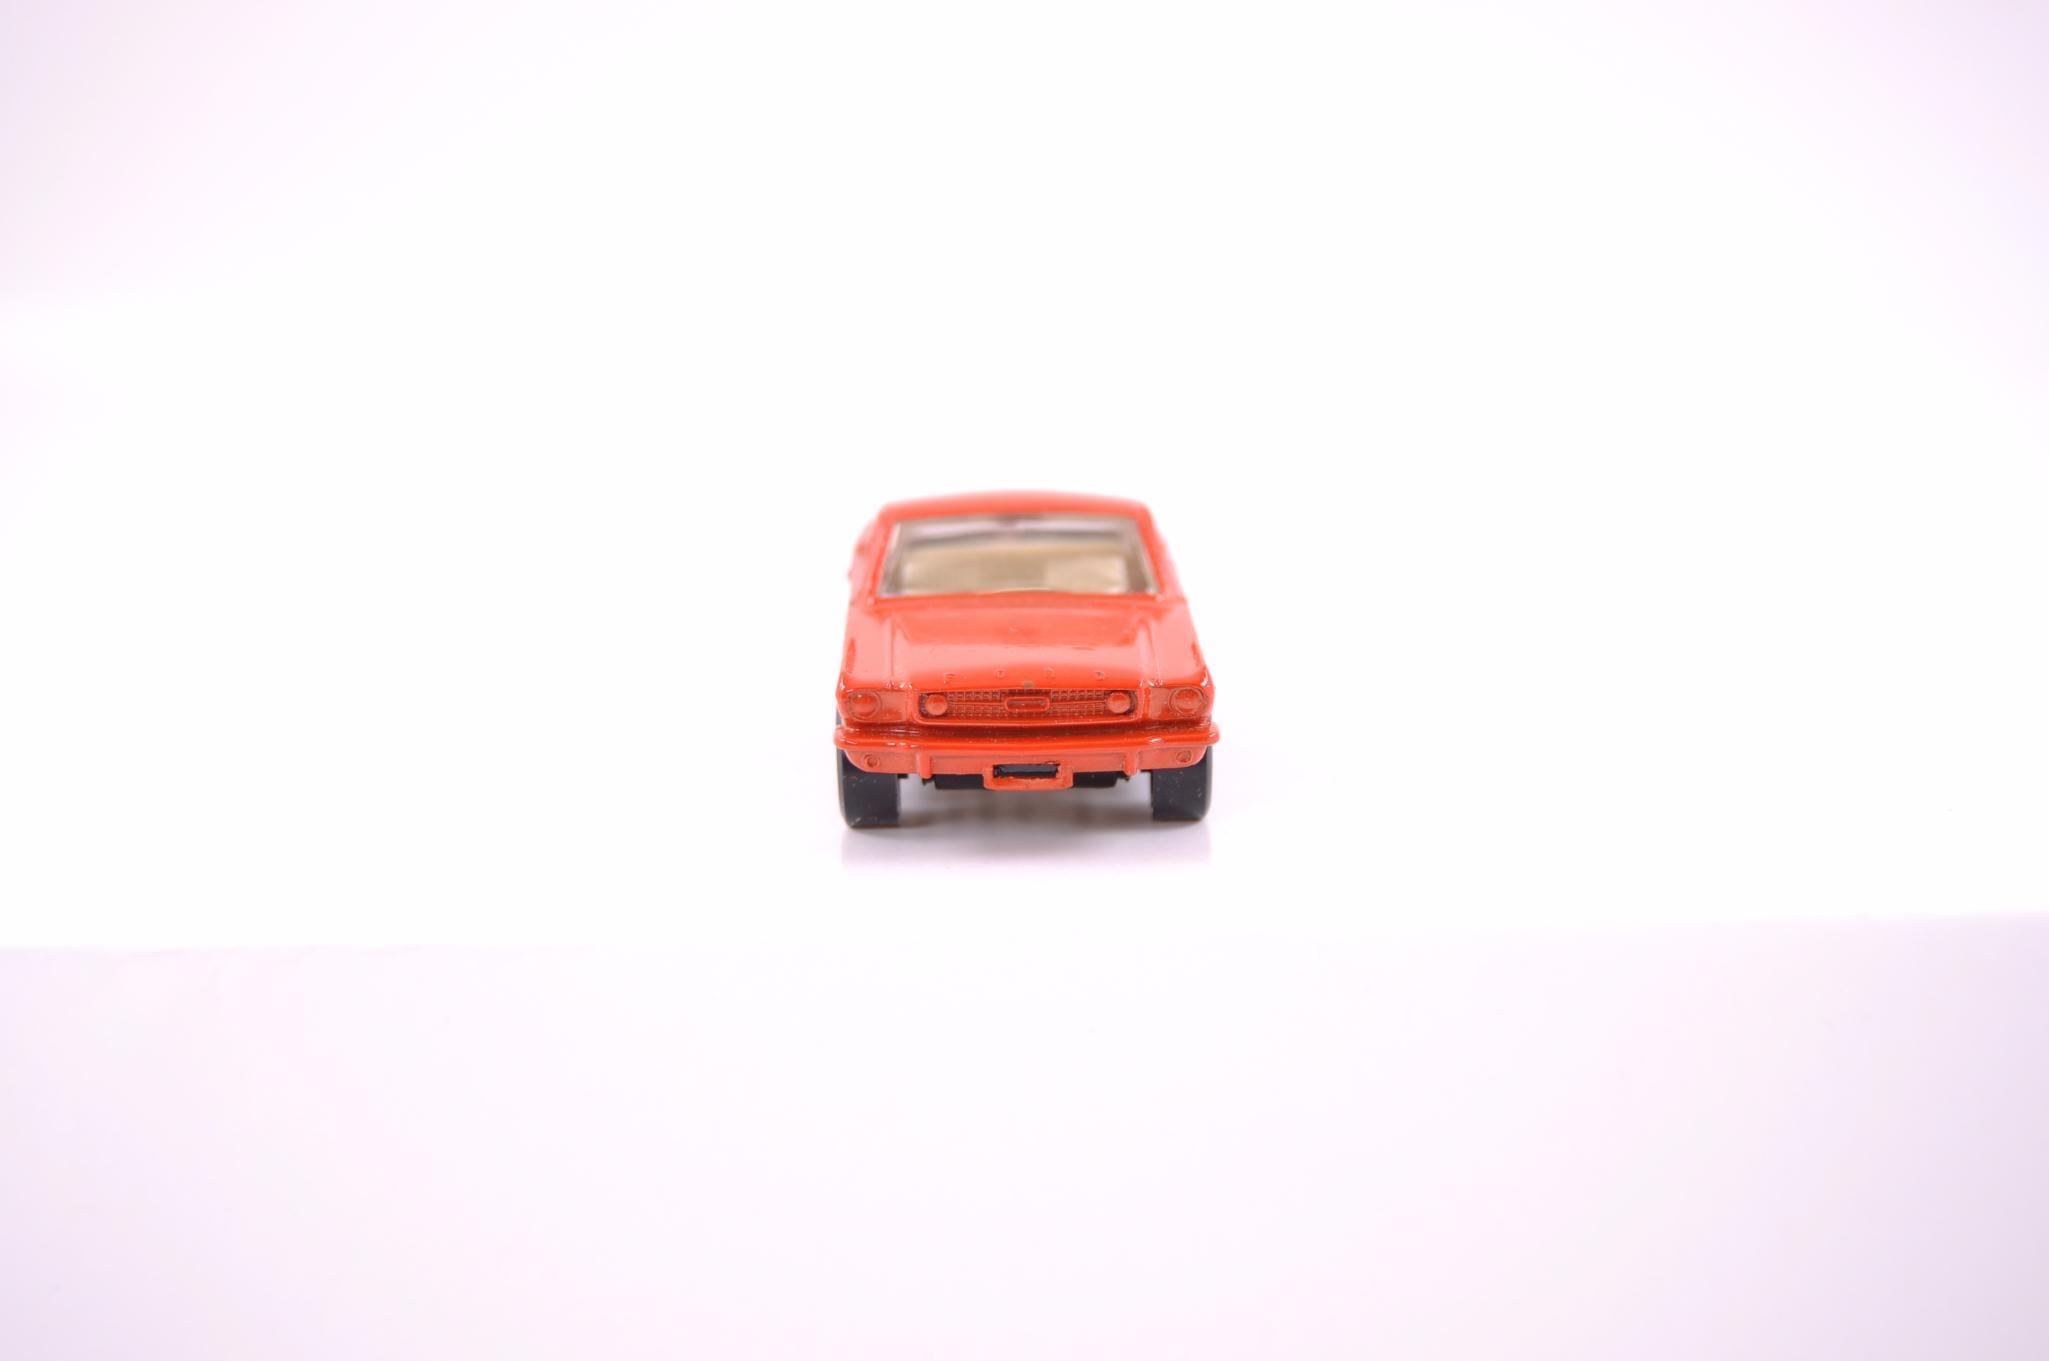 Matchbox Superfast No. 8 Ford Mustang Die-Cast Car with Original Box